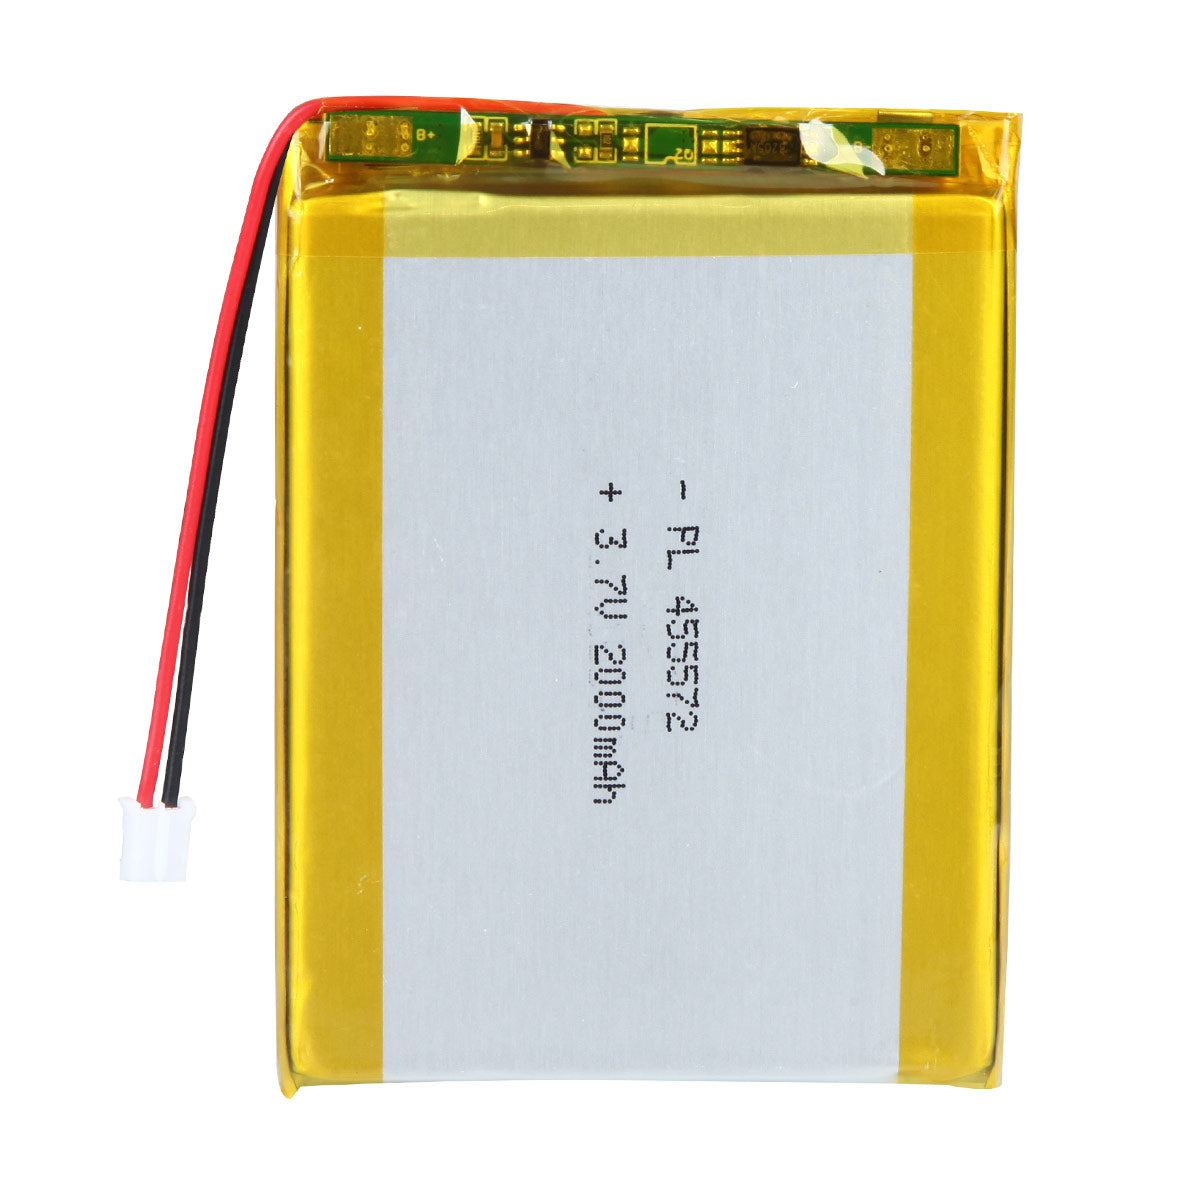 YDL 3.7V 2000mAh 455572 Rechargeable Lithium Polymer Battery Length 74mm